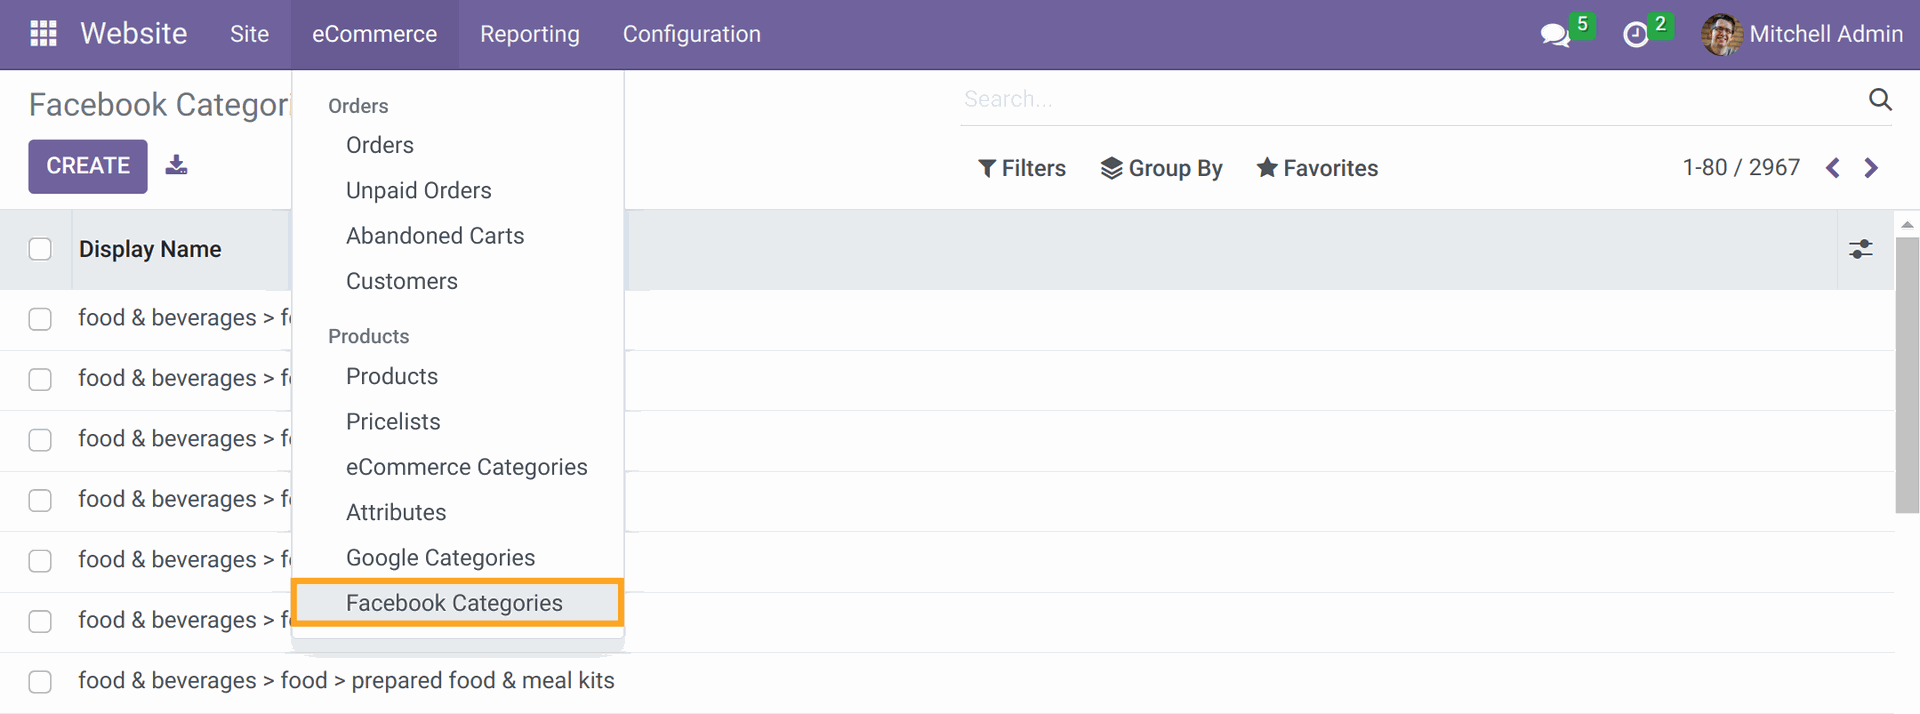 Odoo 17.0 Facebook Product Category list